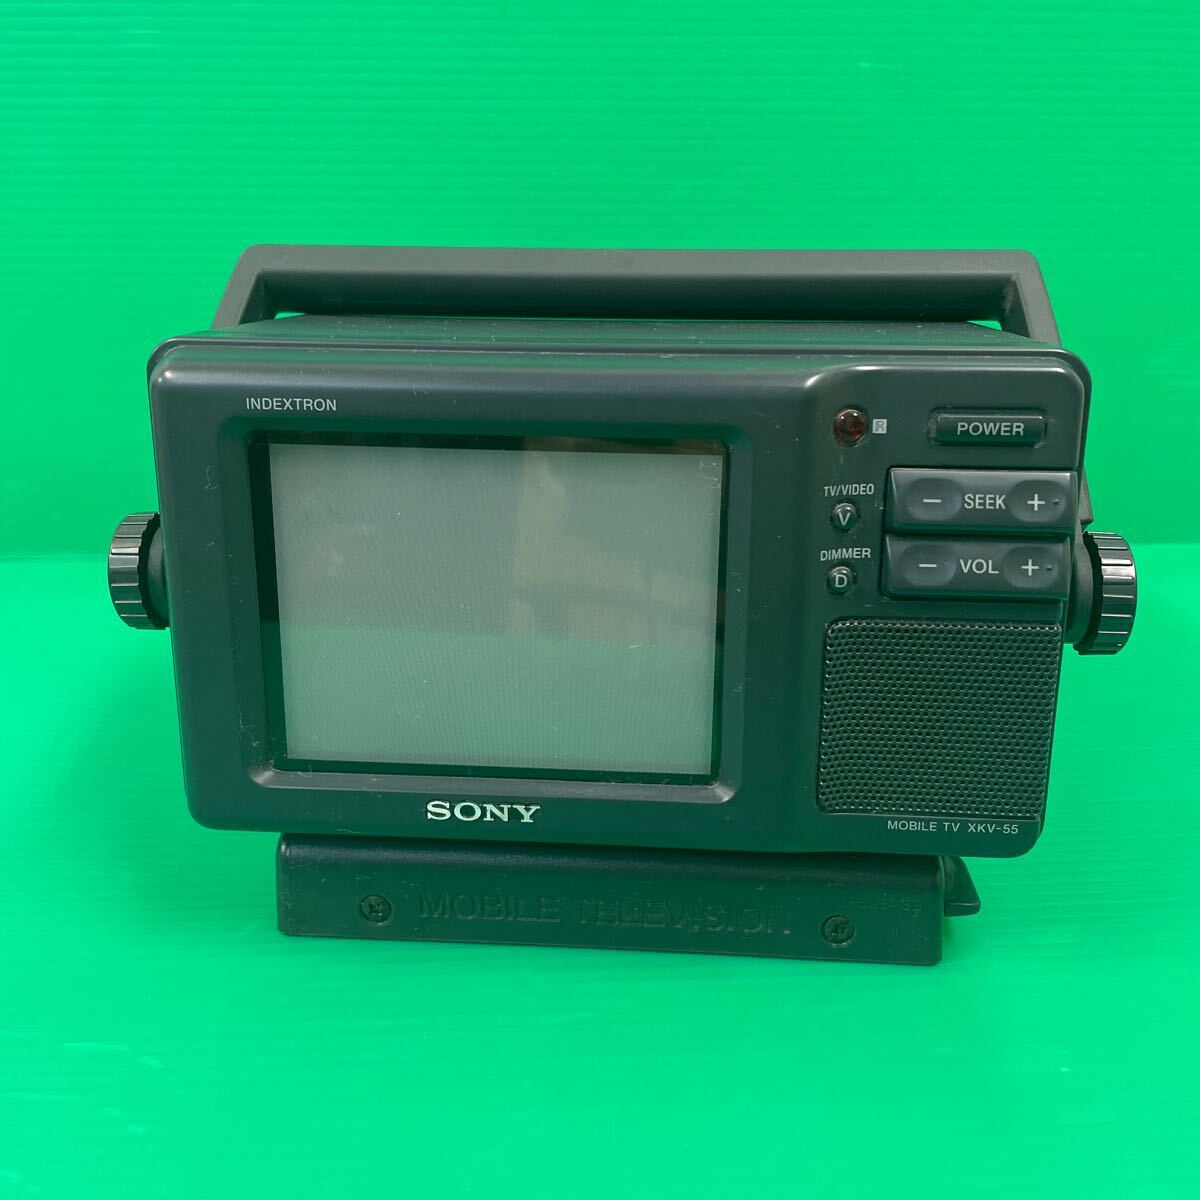 Z.B#97 SONY INDEXTRON mobile Television mobile TV XKV-55 Sony used present condition goods 